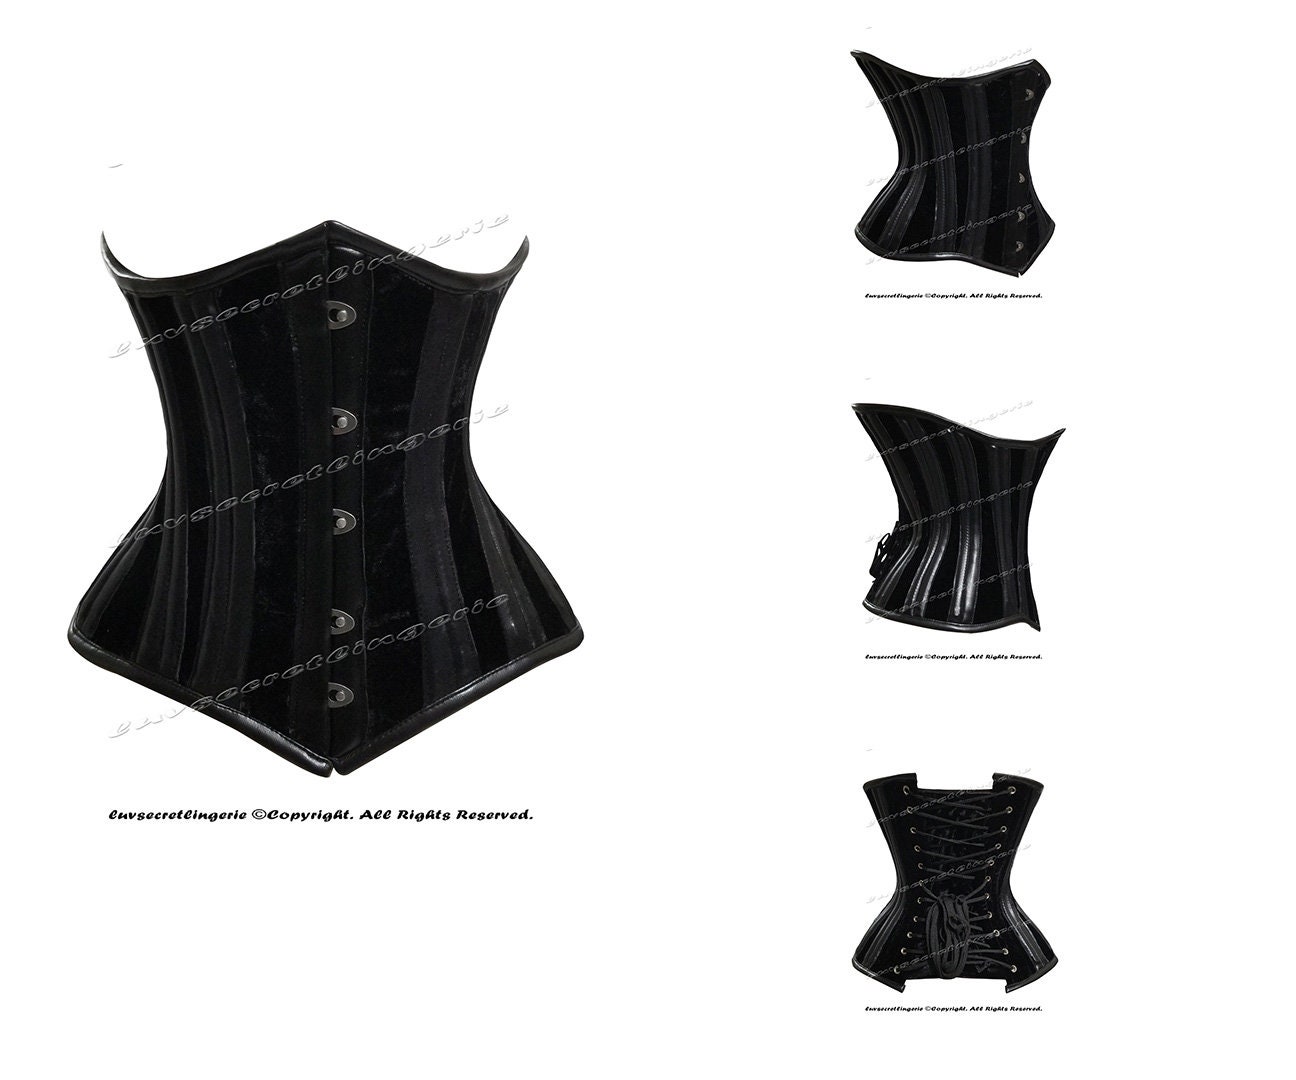  XXSC Zip-up Waist Belly Corset with Double Reinforcement for  Sculpting, Firming, and Belly Shape Black-M : Clothing, Shoes & Jewelry